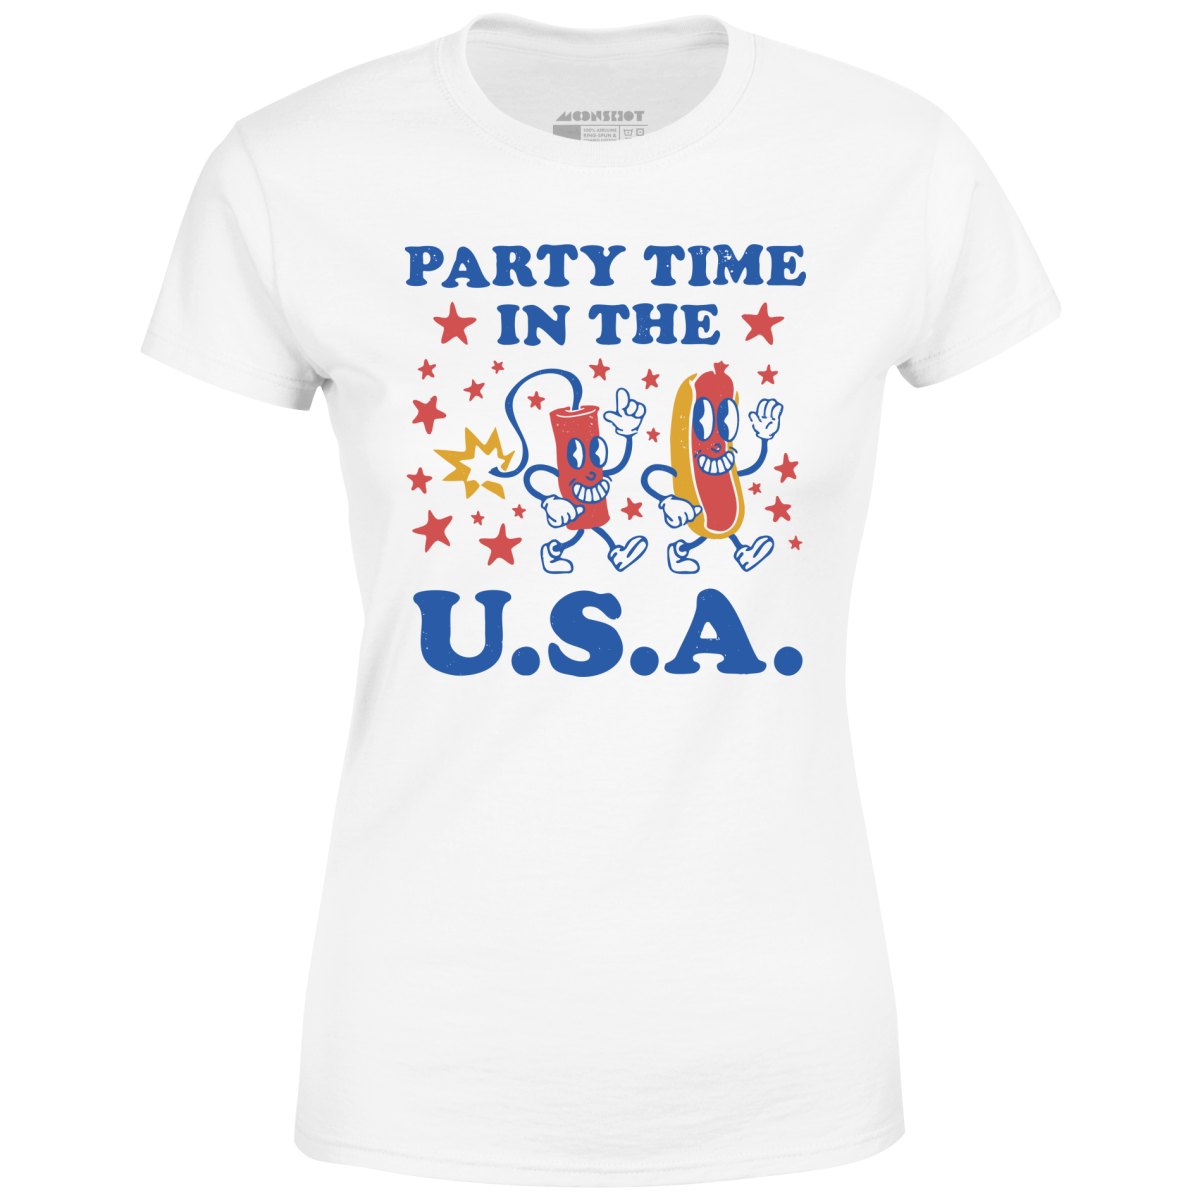 Party Time in The U.S.A. - Women's T-Shirt